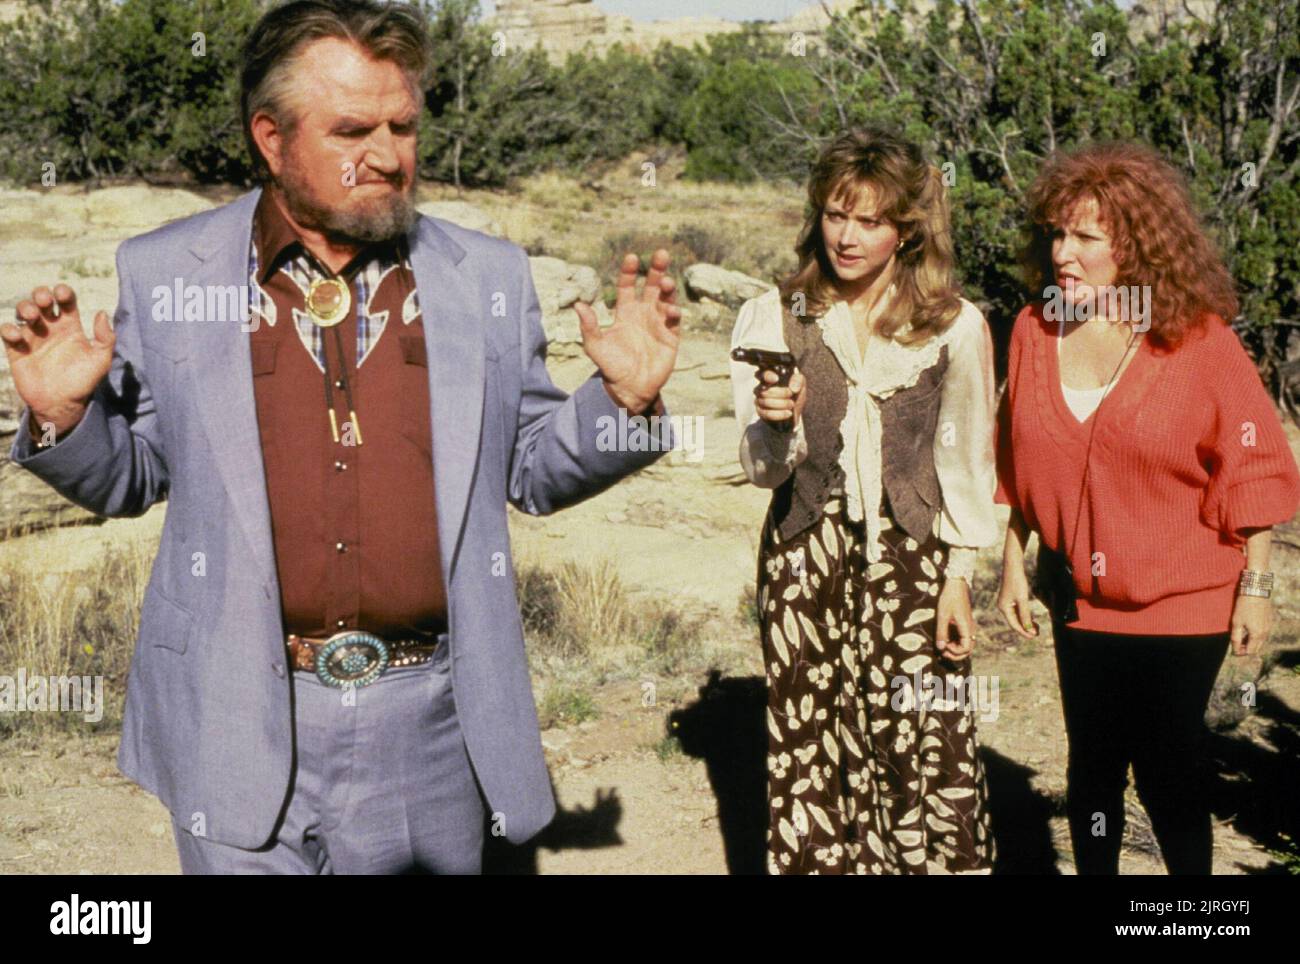 ROBERT PROSKY, SHELLEY LONG, BETTE MIDLER, OUTRAGEOUS FORTUNE, 1987 Stock Photo